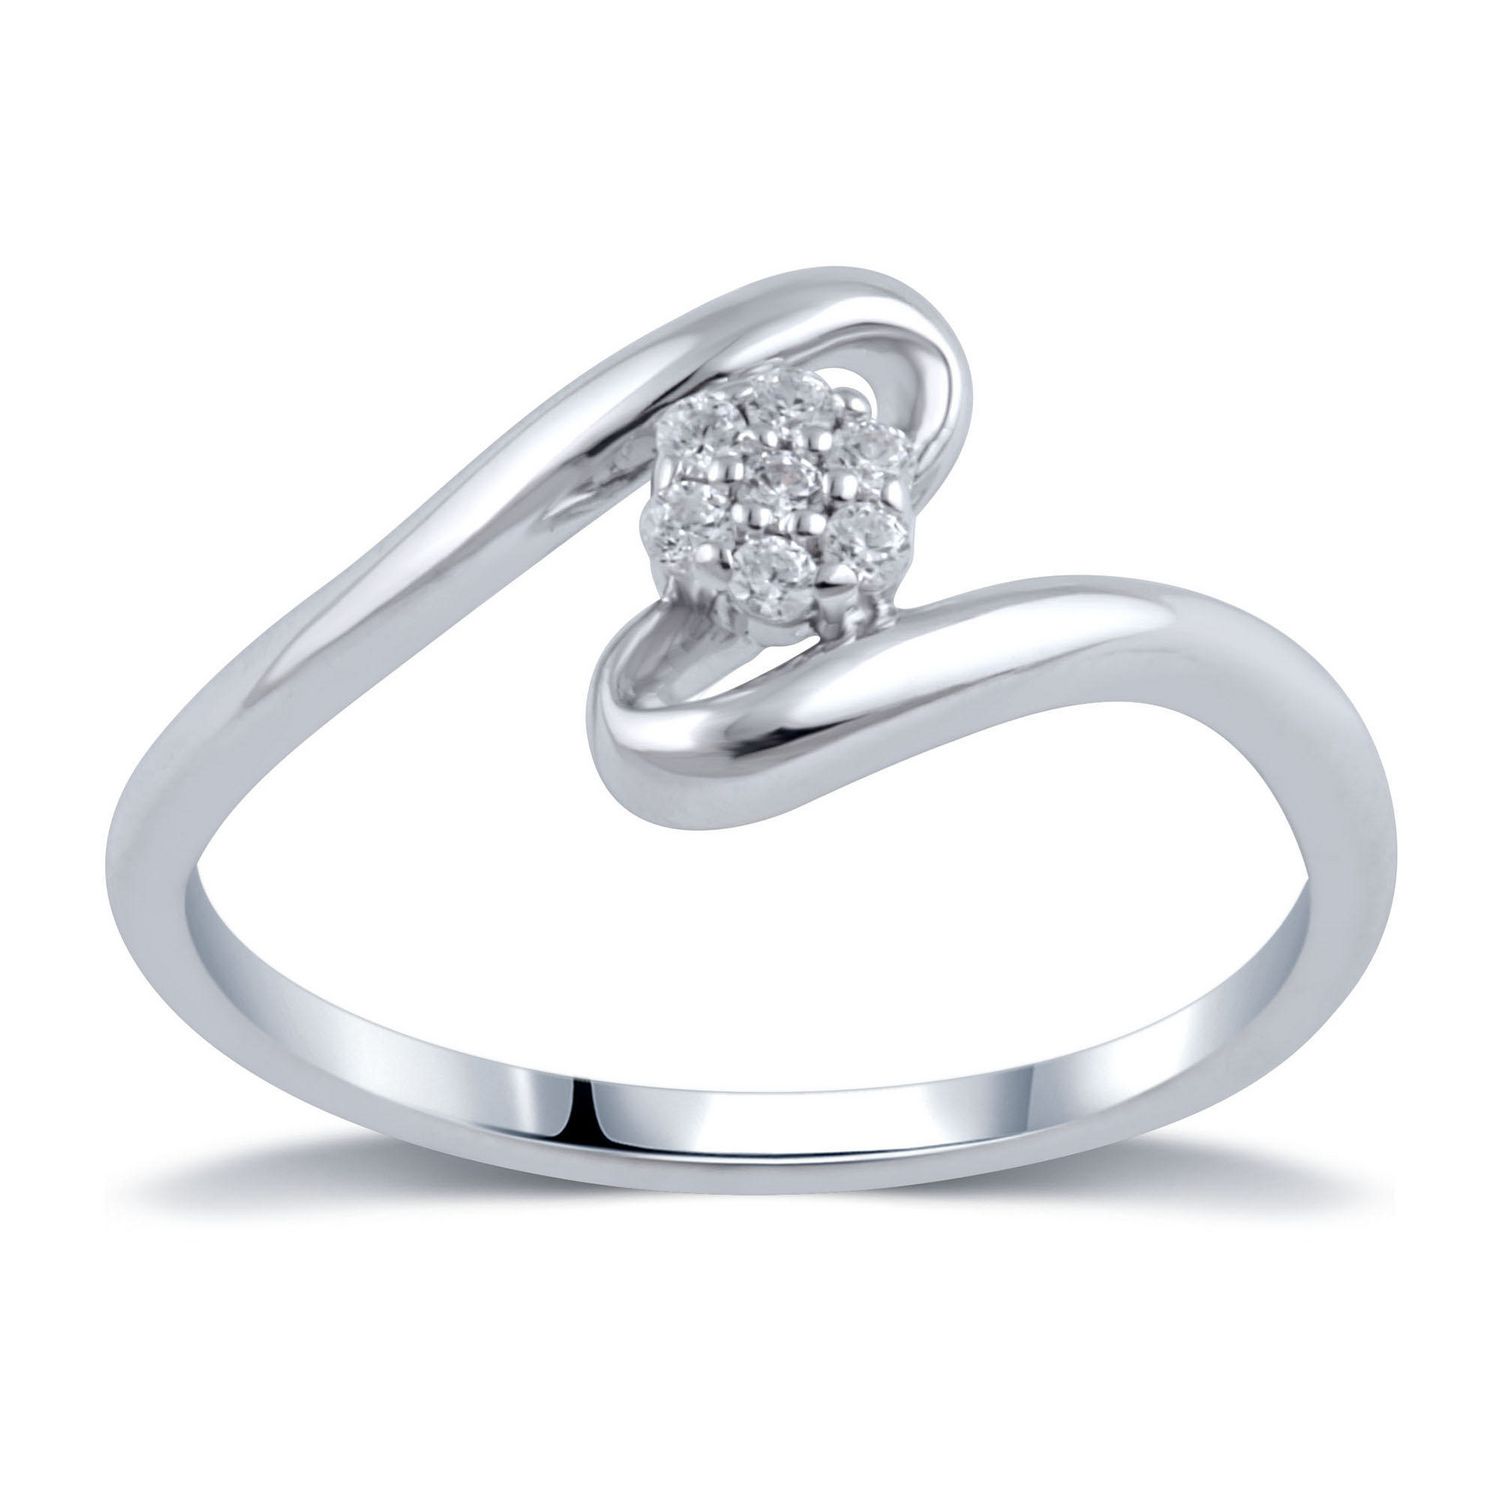 0.10 Ct T.W. Diamond Cluster Ring in Sterling Silver. | Walmart Canada